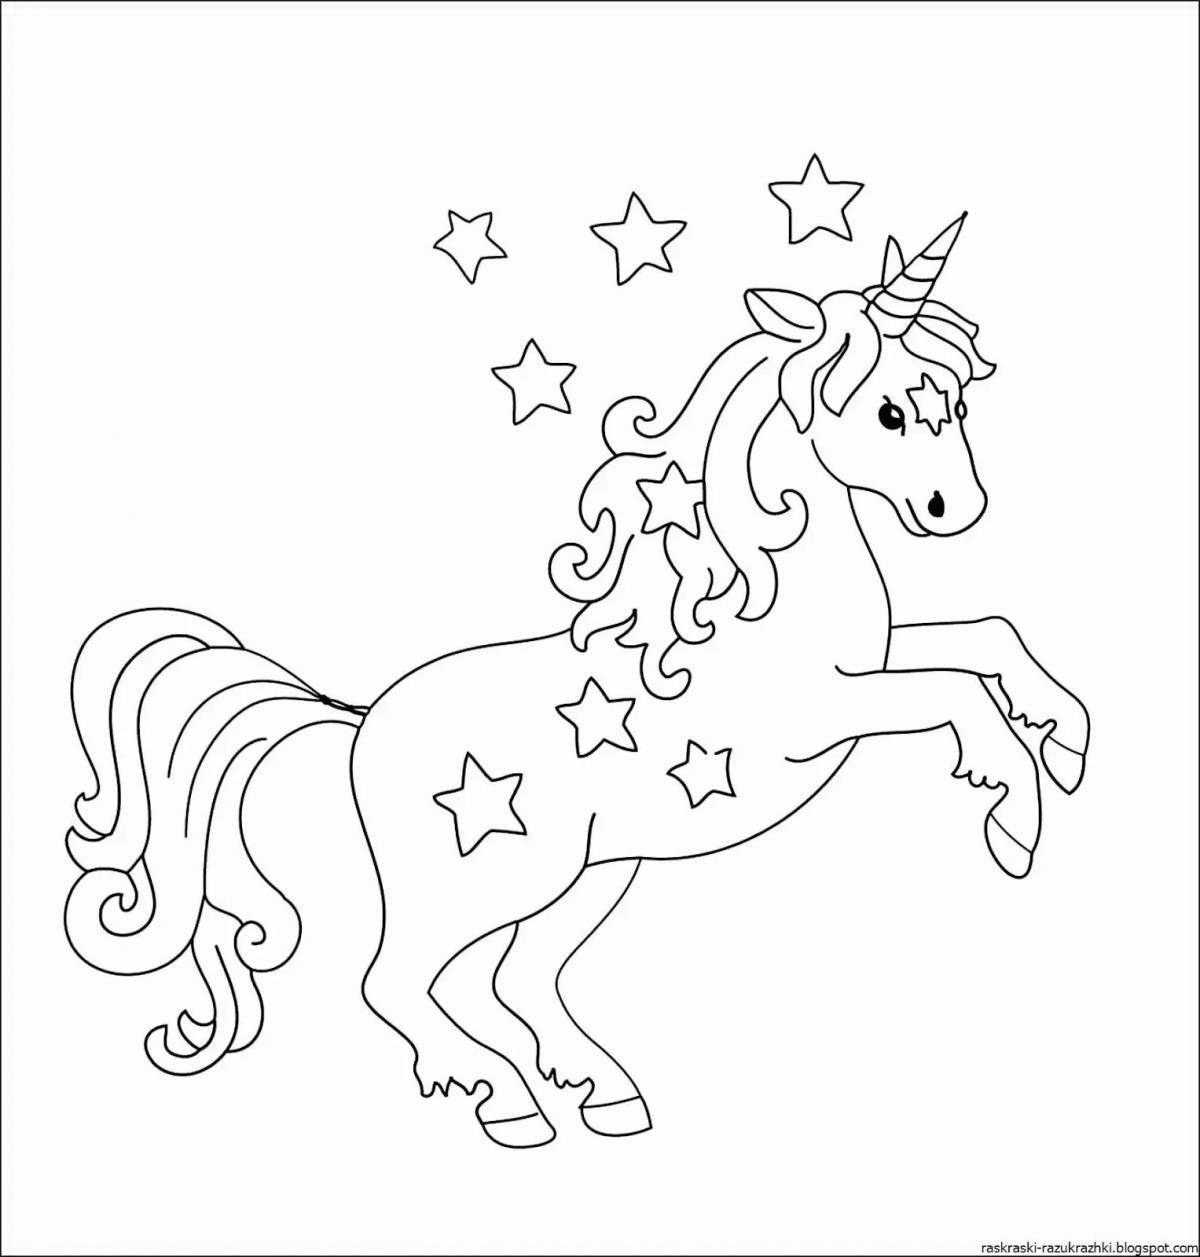 Great coloring drawing of a unicorn